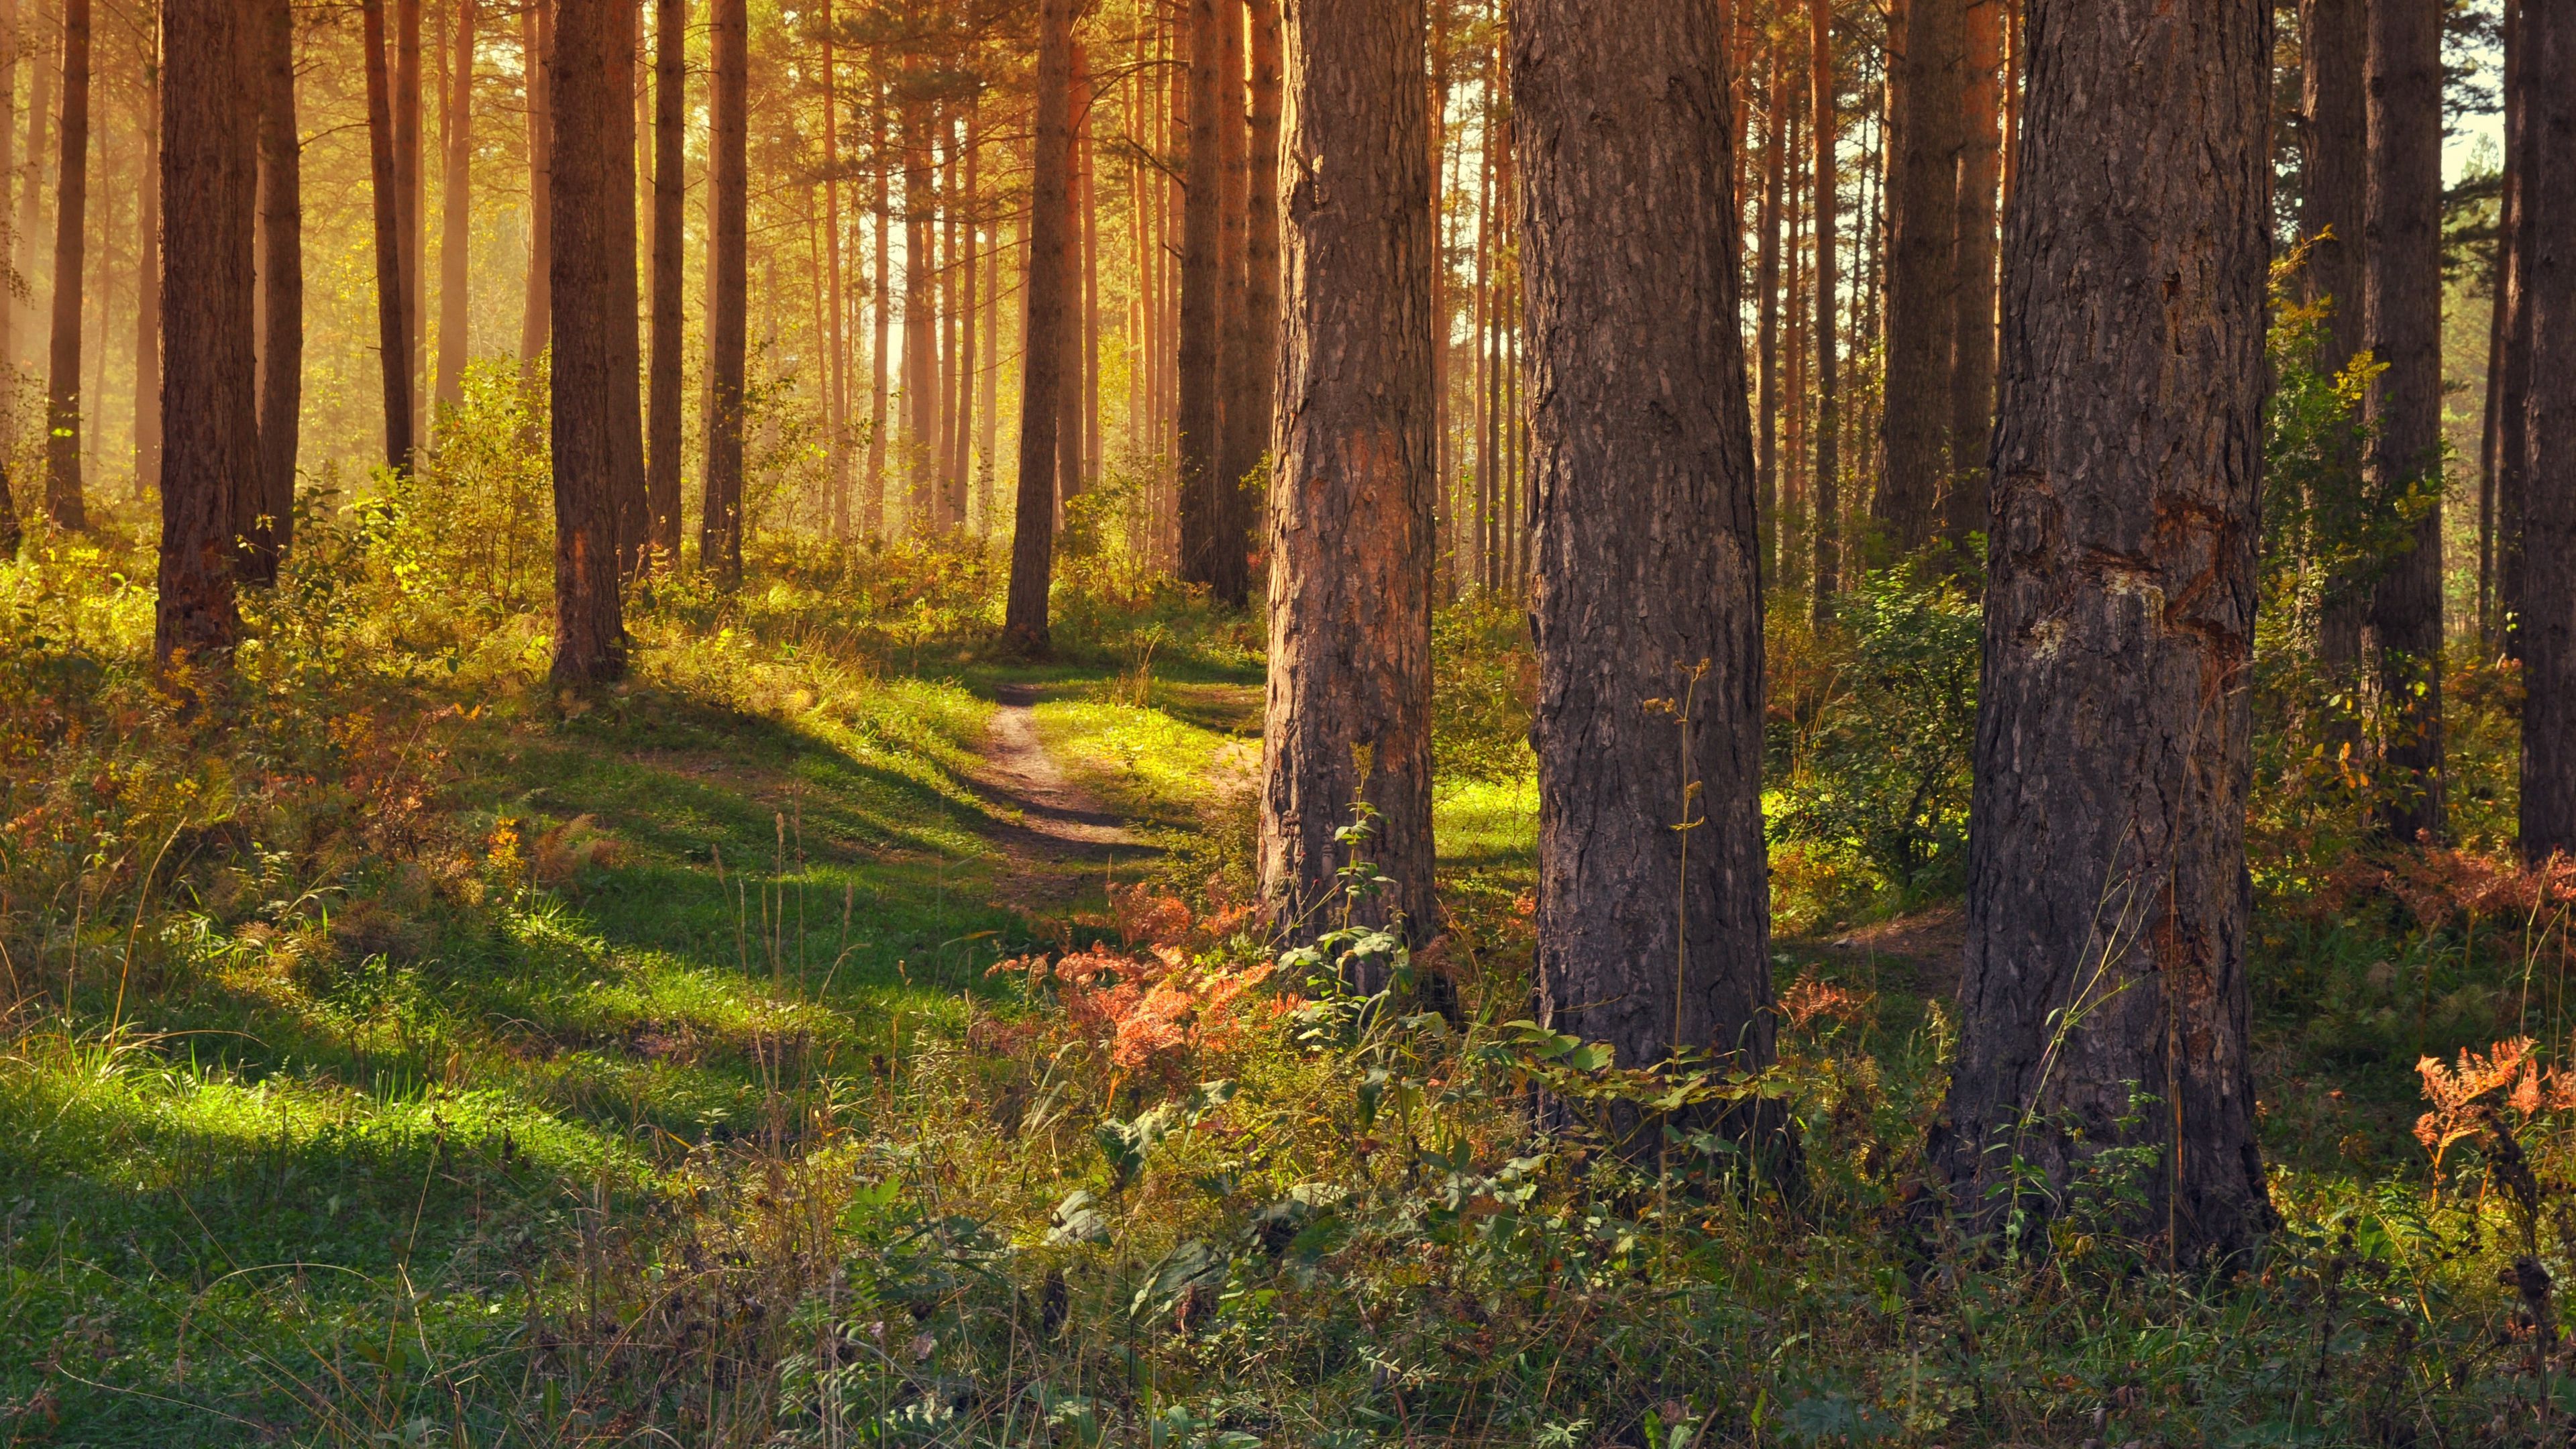 Download wallpaper 3840x2160 forest, path, trees, landscape, summer 4k uhd 16:9 HD background